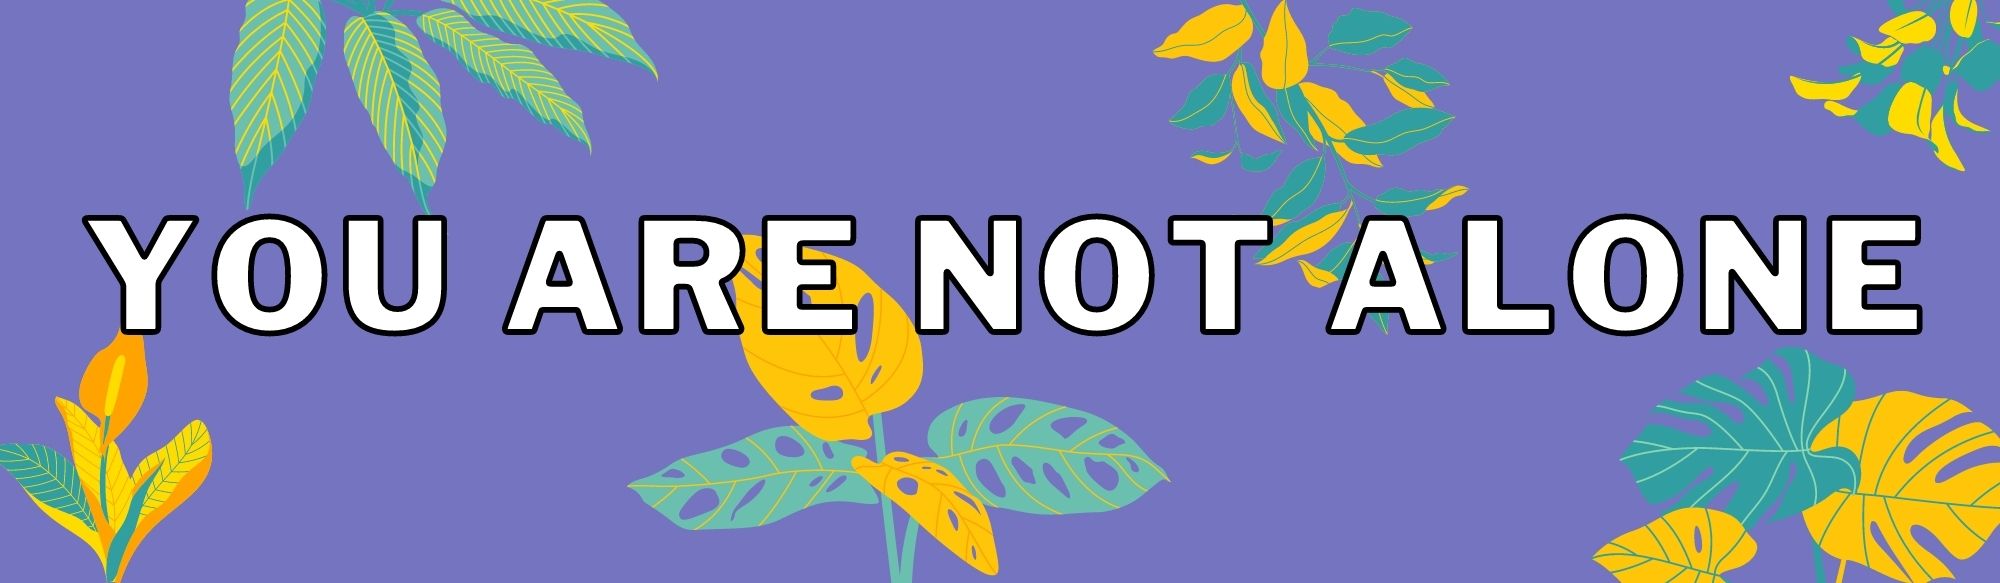 Graphic with the text "you are not alone" on top of a purple background with blue and yellow coloured flowers.